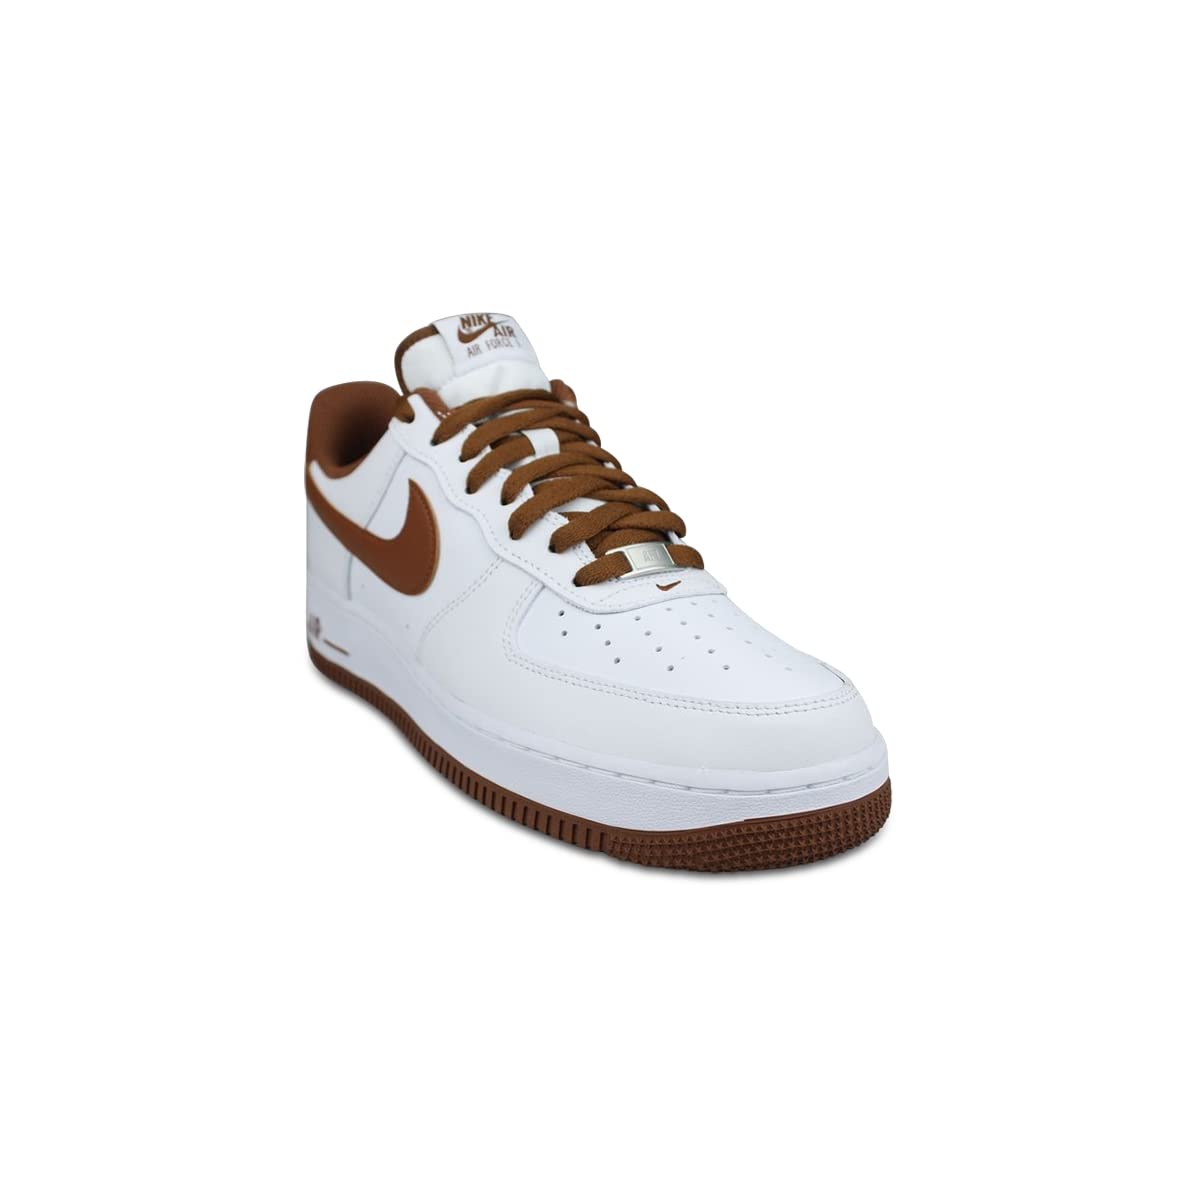 Nike Unisex Air Force 1 07 Leather Pecan White Trainers 11.5 W / 10 M US